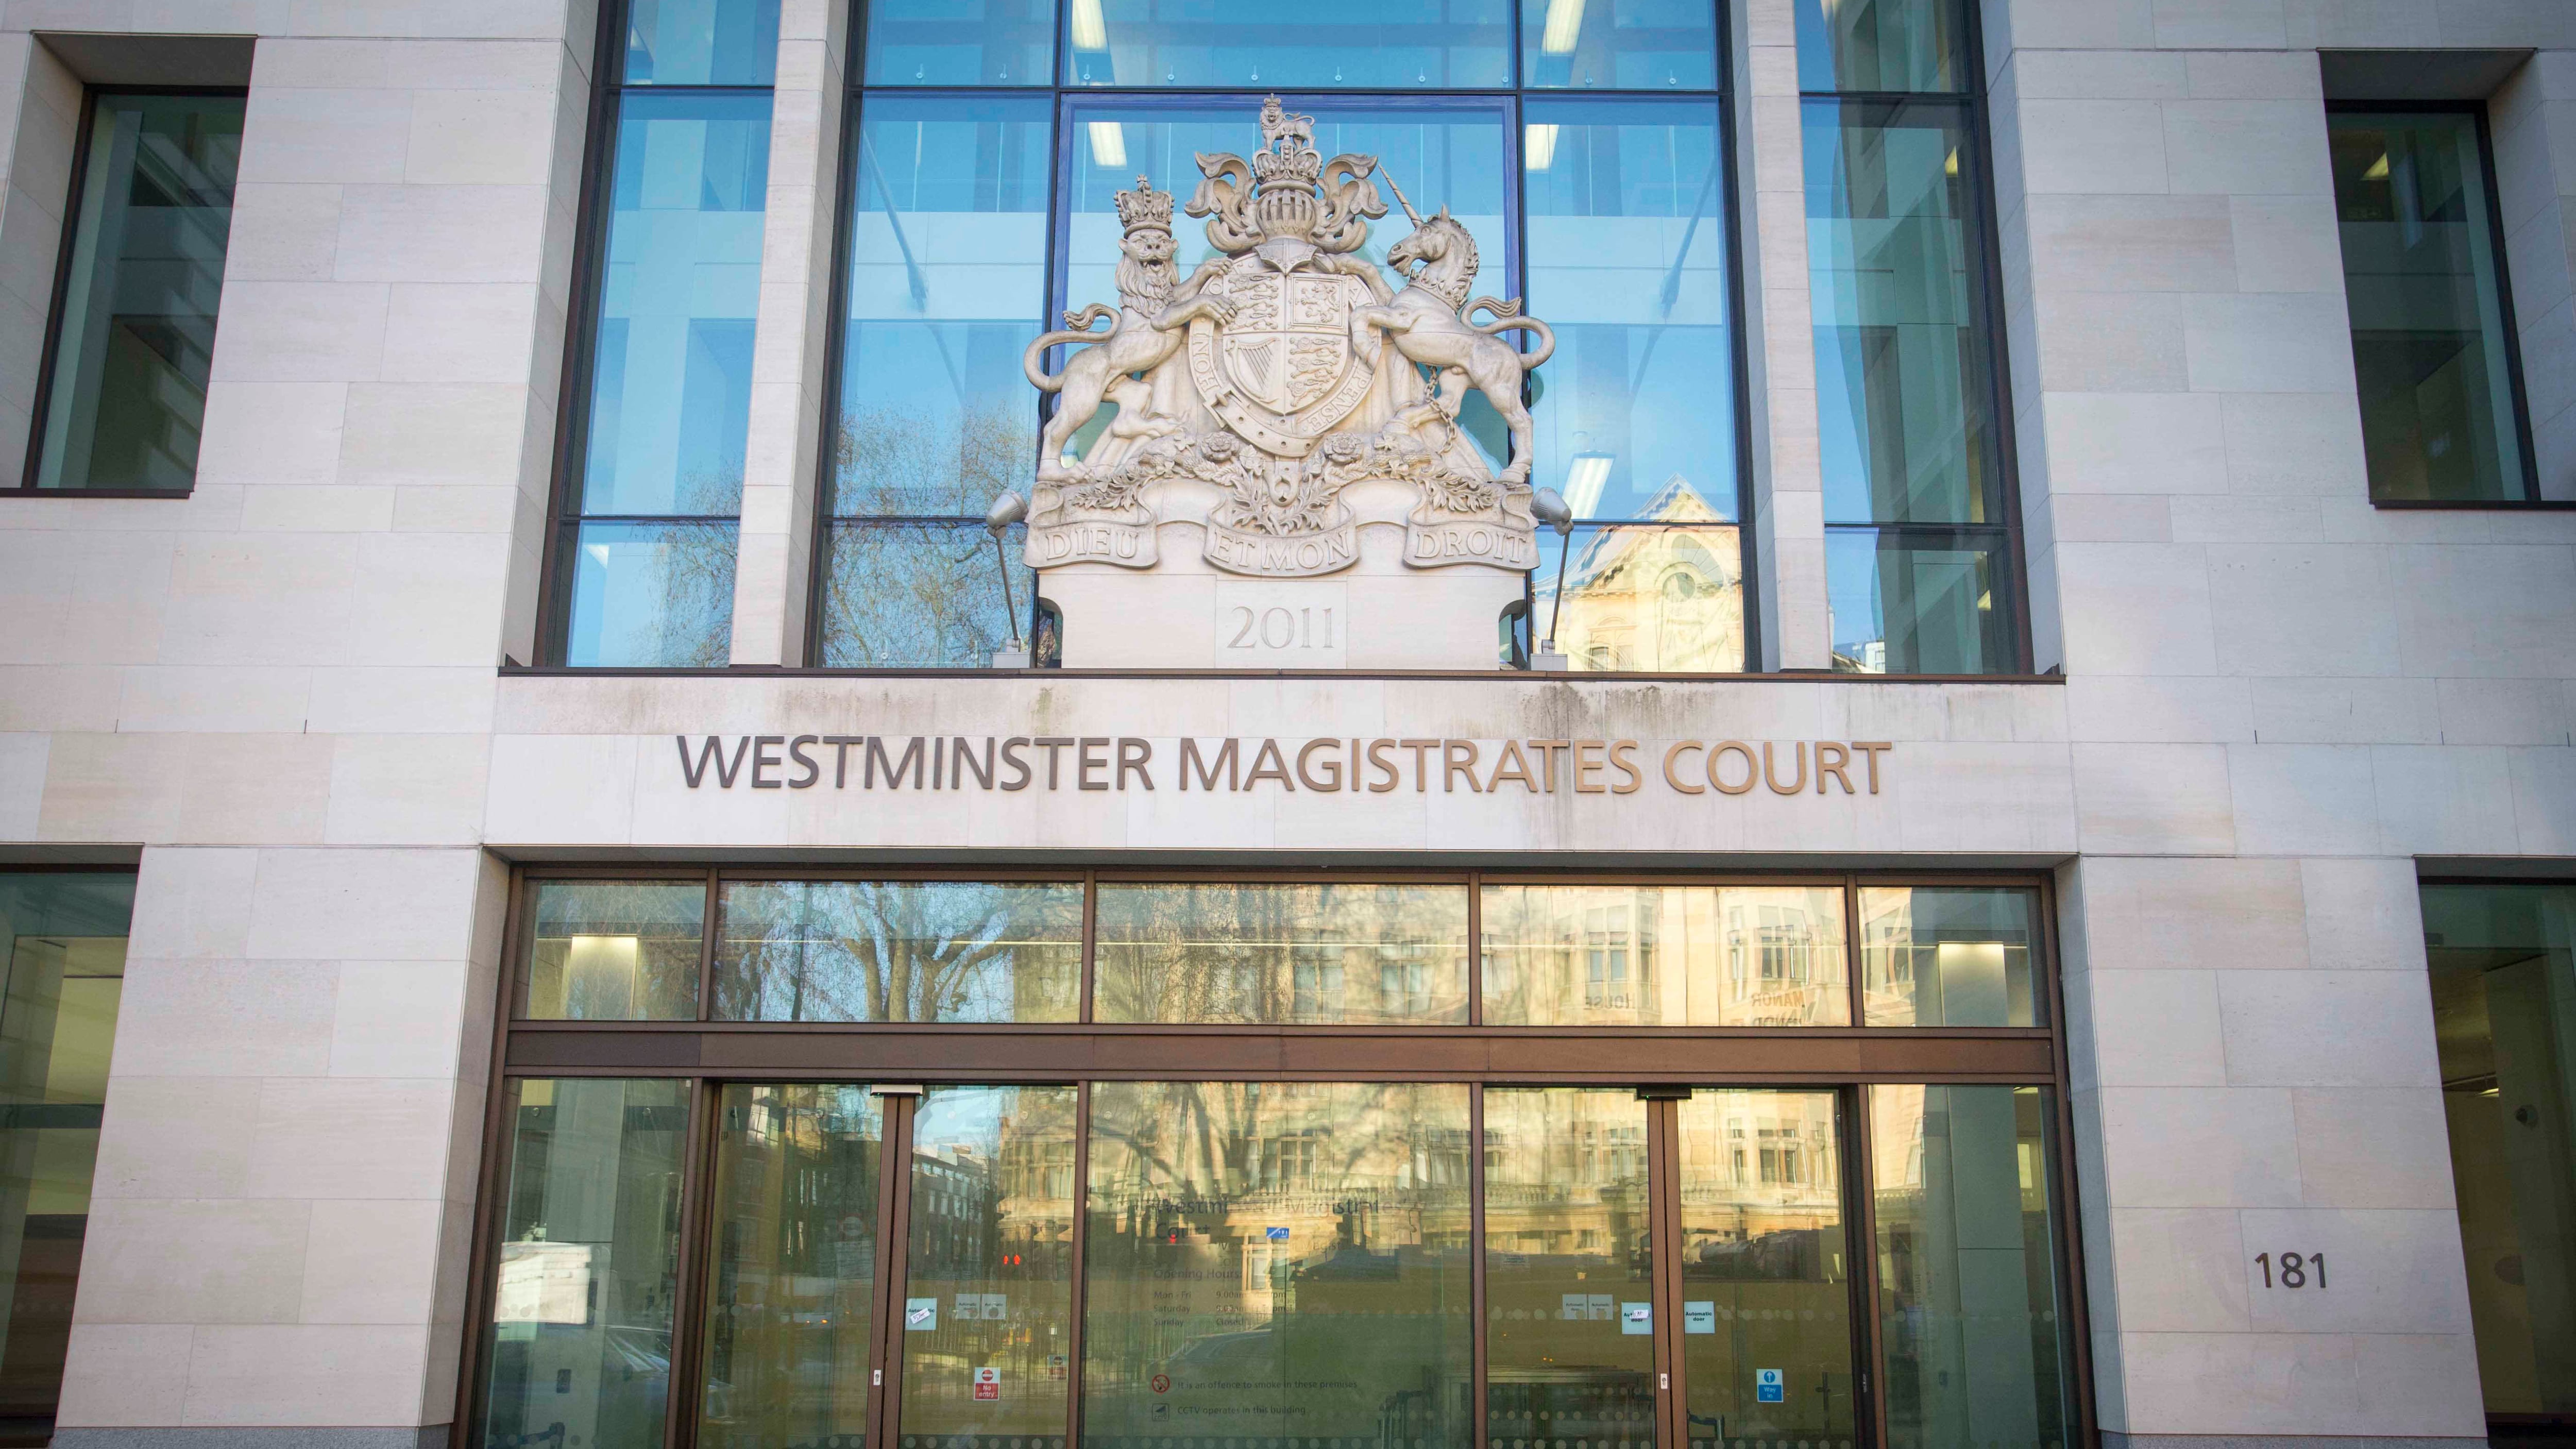 Howard Michael Phillips appeared at Westminster Magistrates’ Court